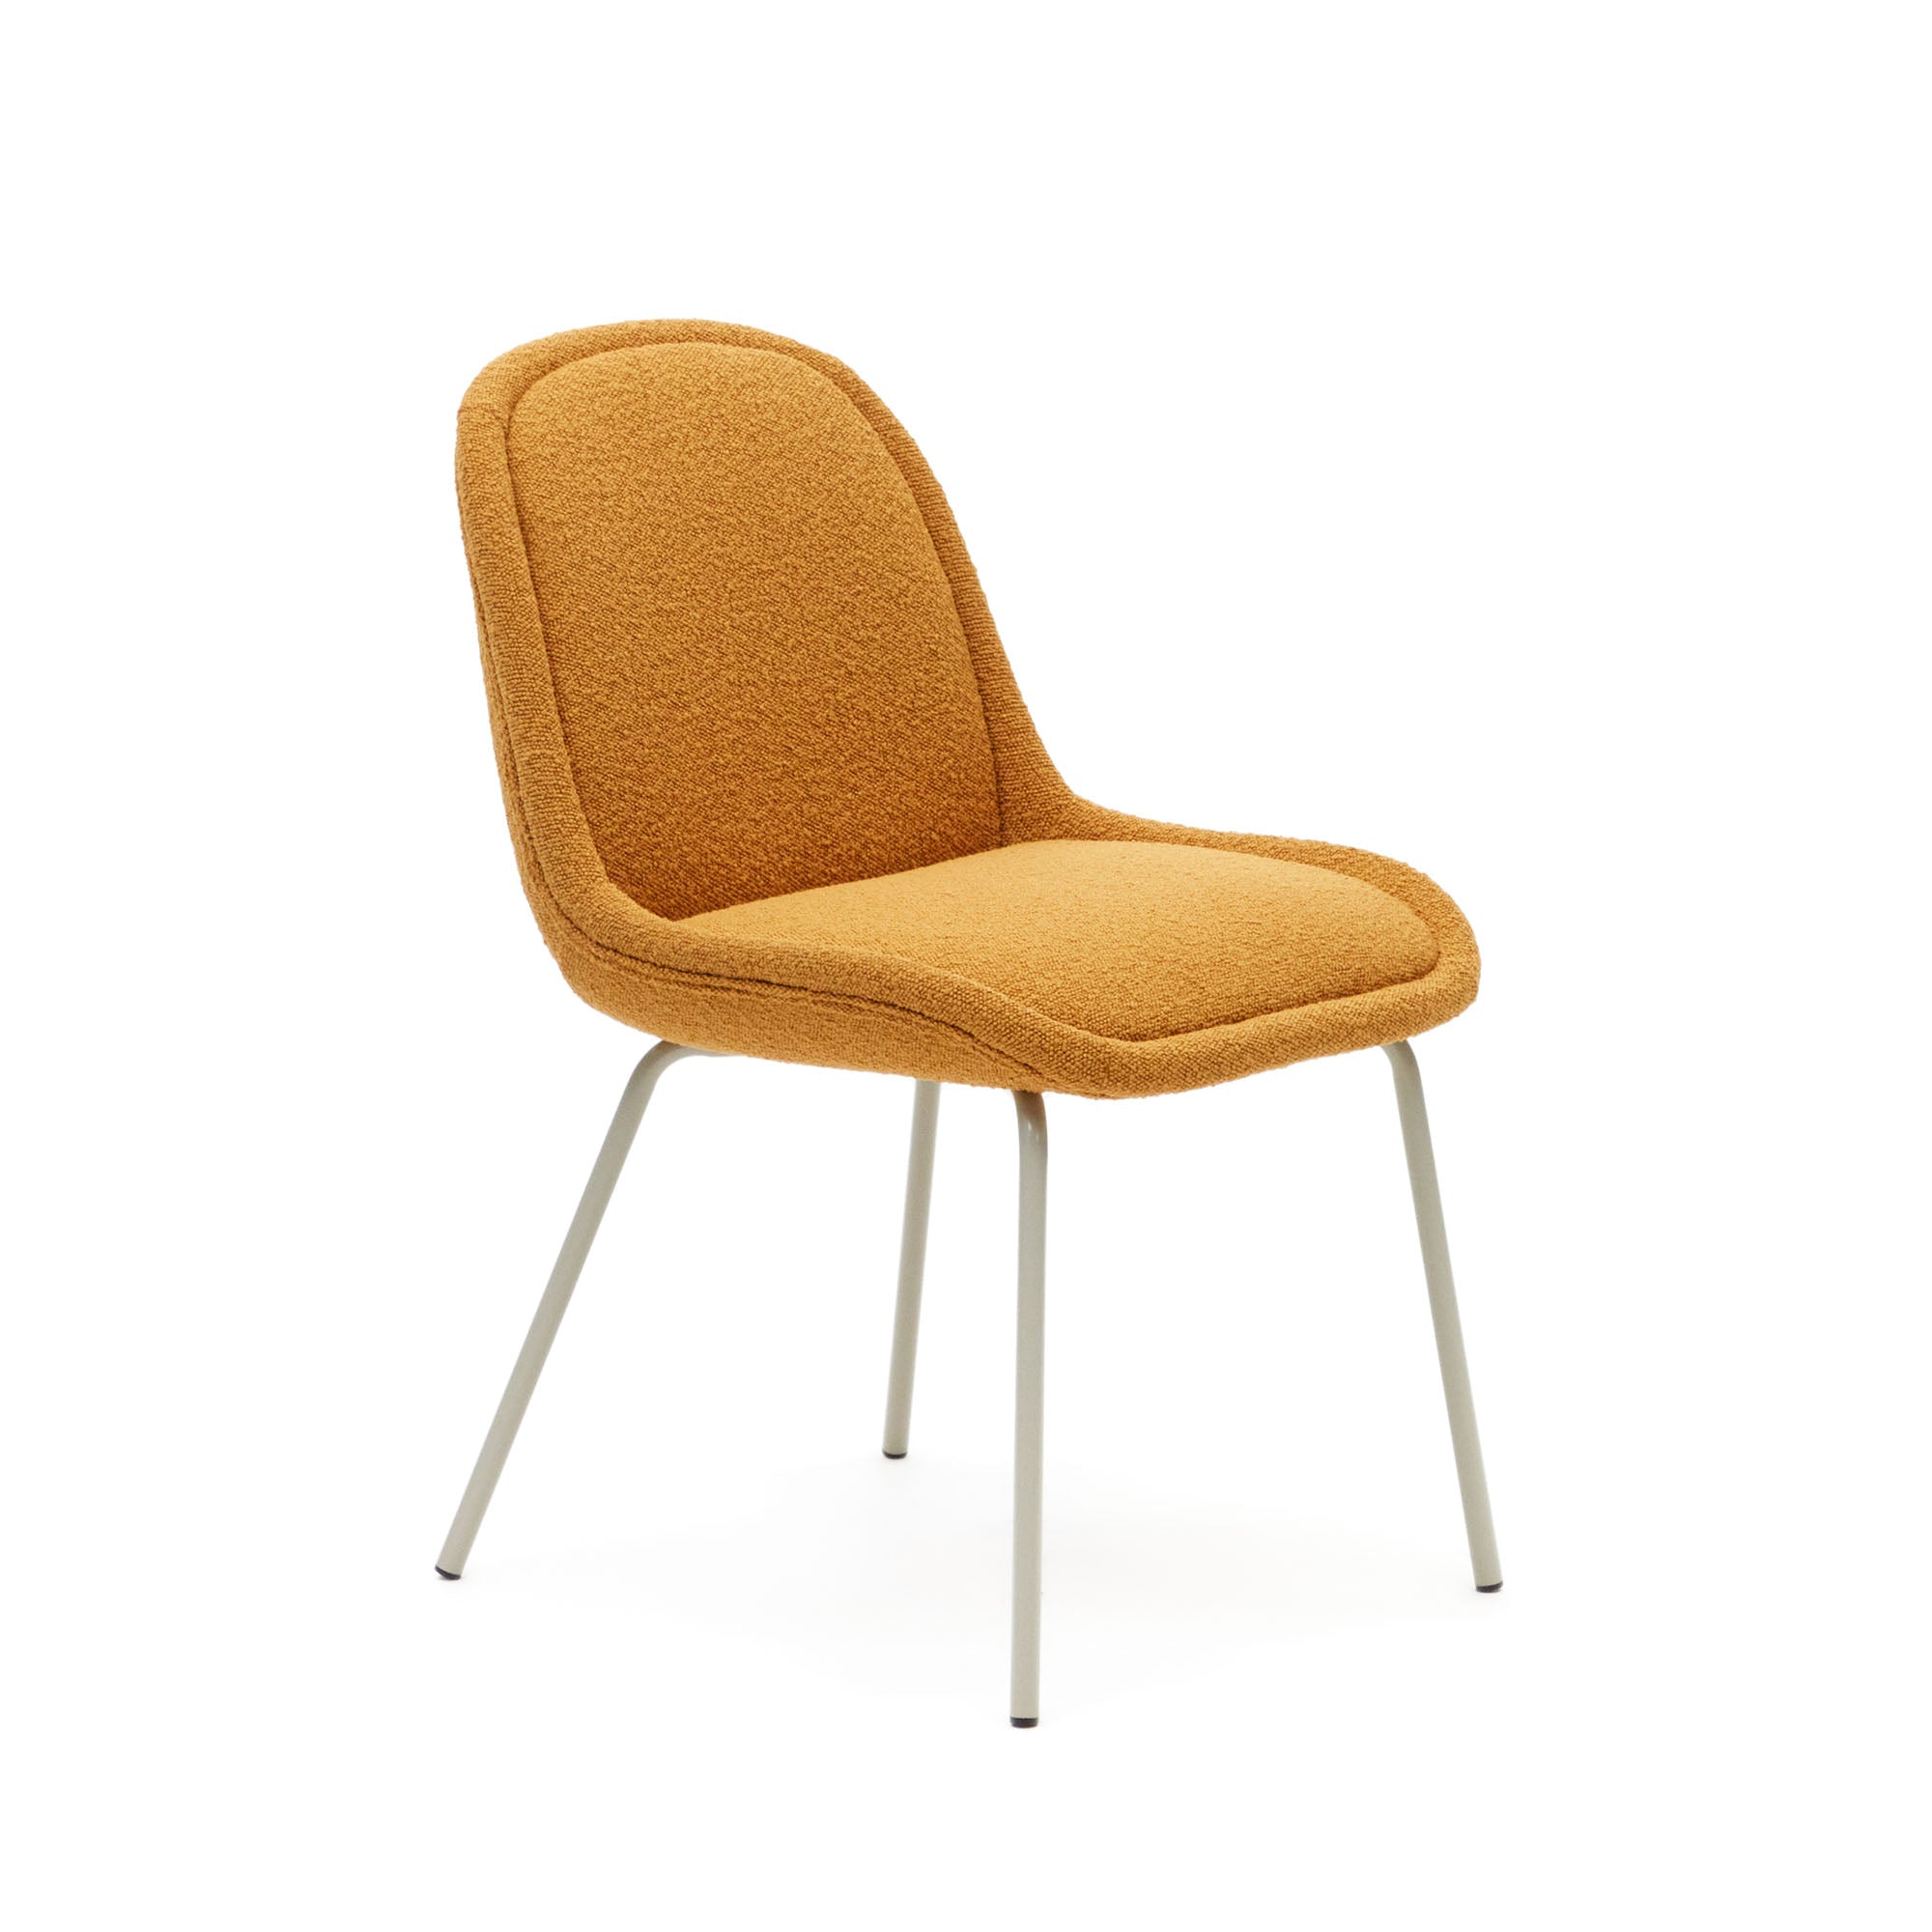 Aimin chair in mustard fleece and steel legs with a matte beige painted finish